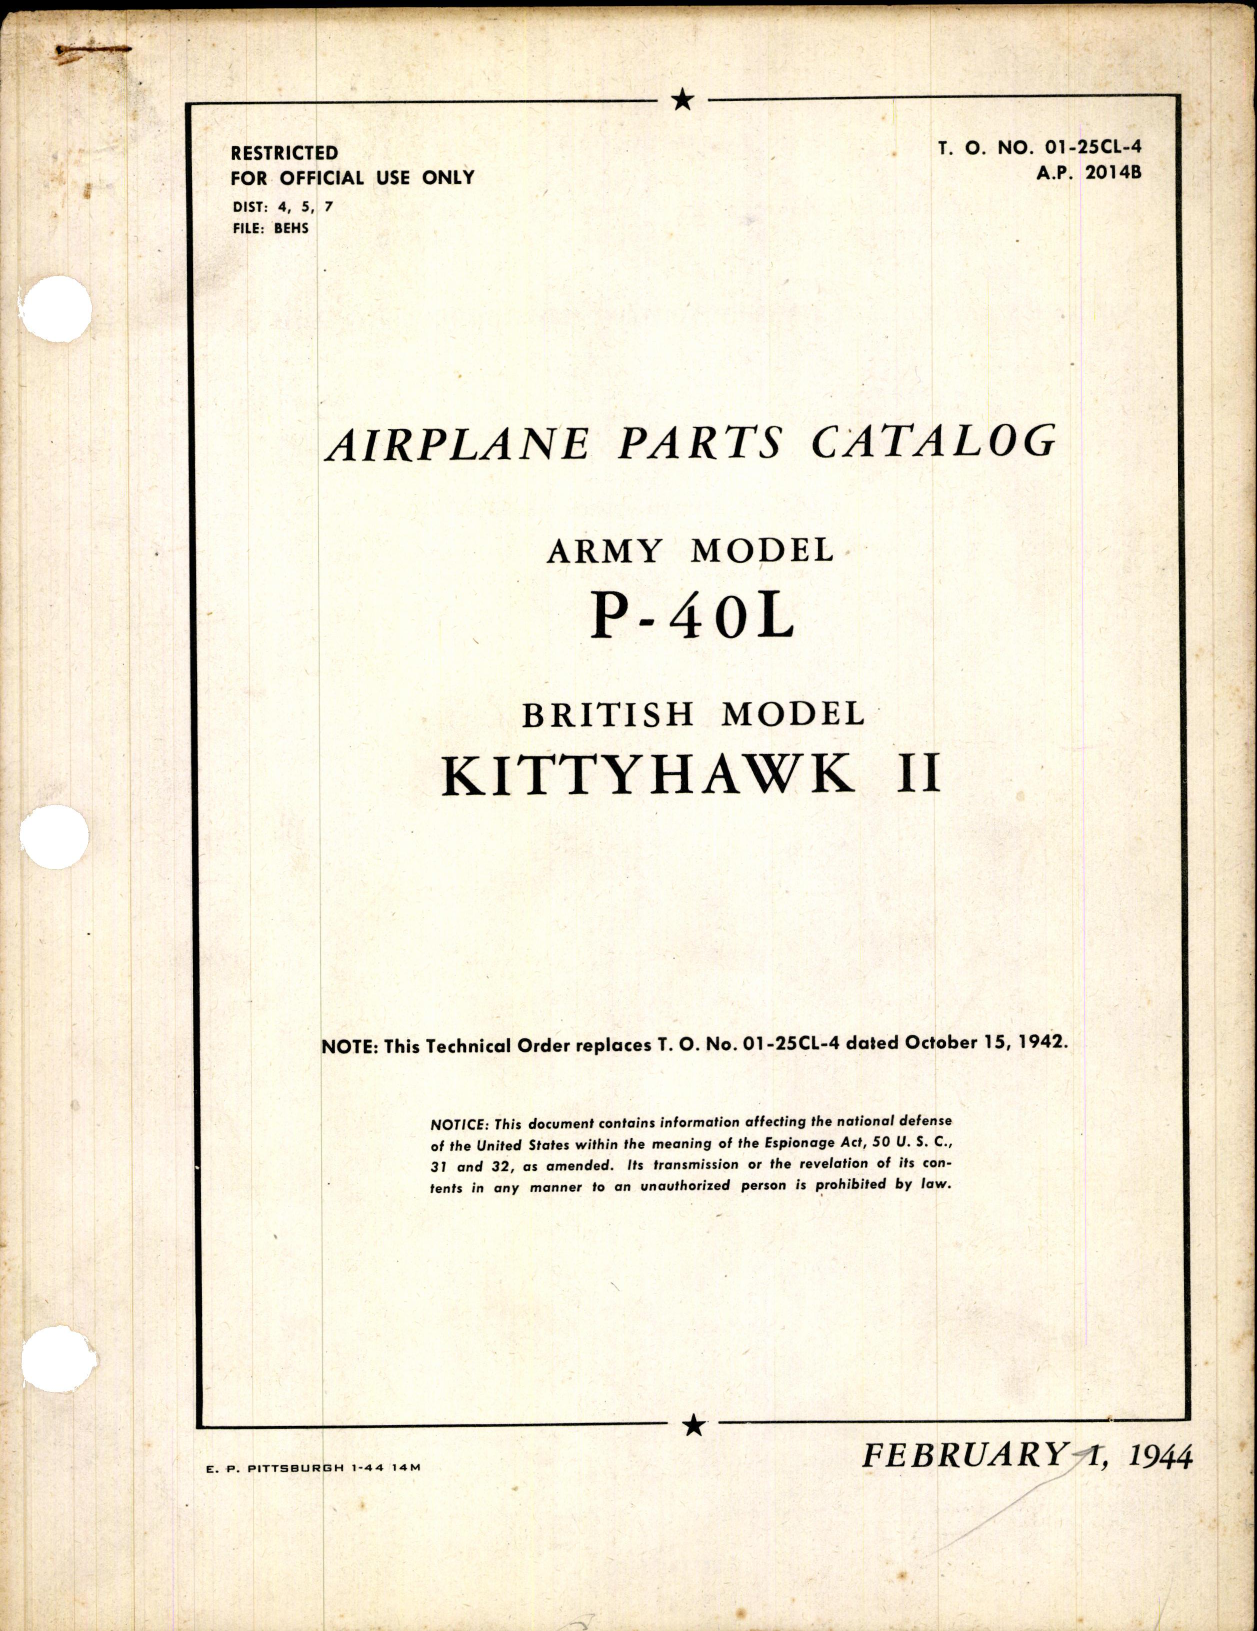 Sample page 1 from AirCorps Library document: Airplane Parts Catalog for Army Model P-40L